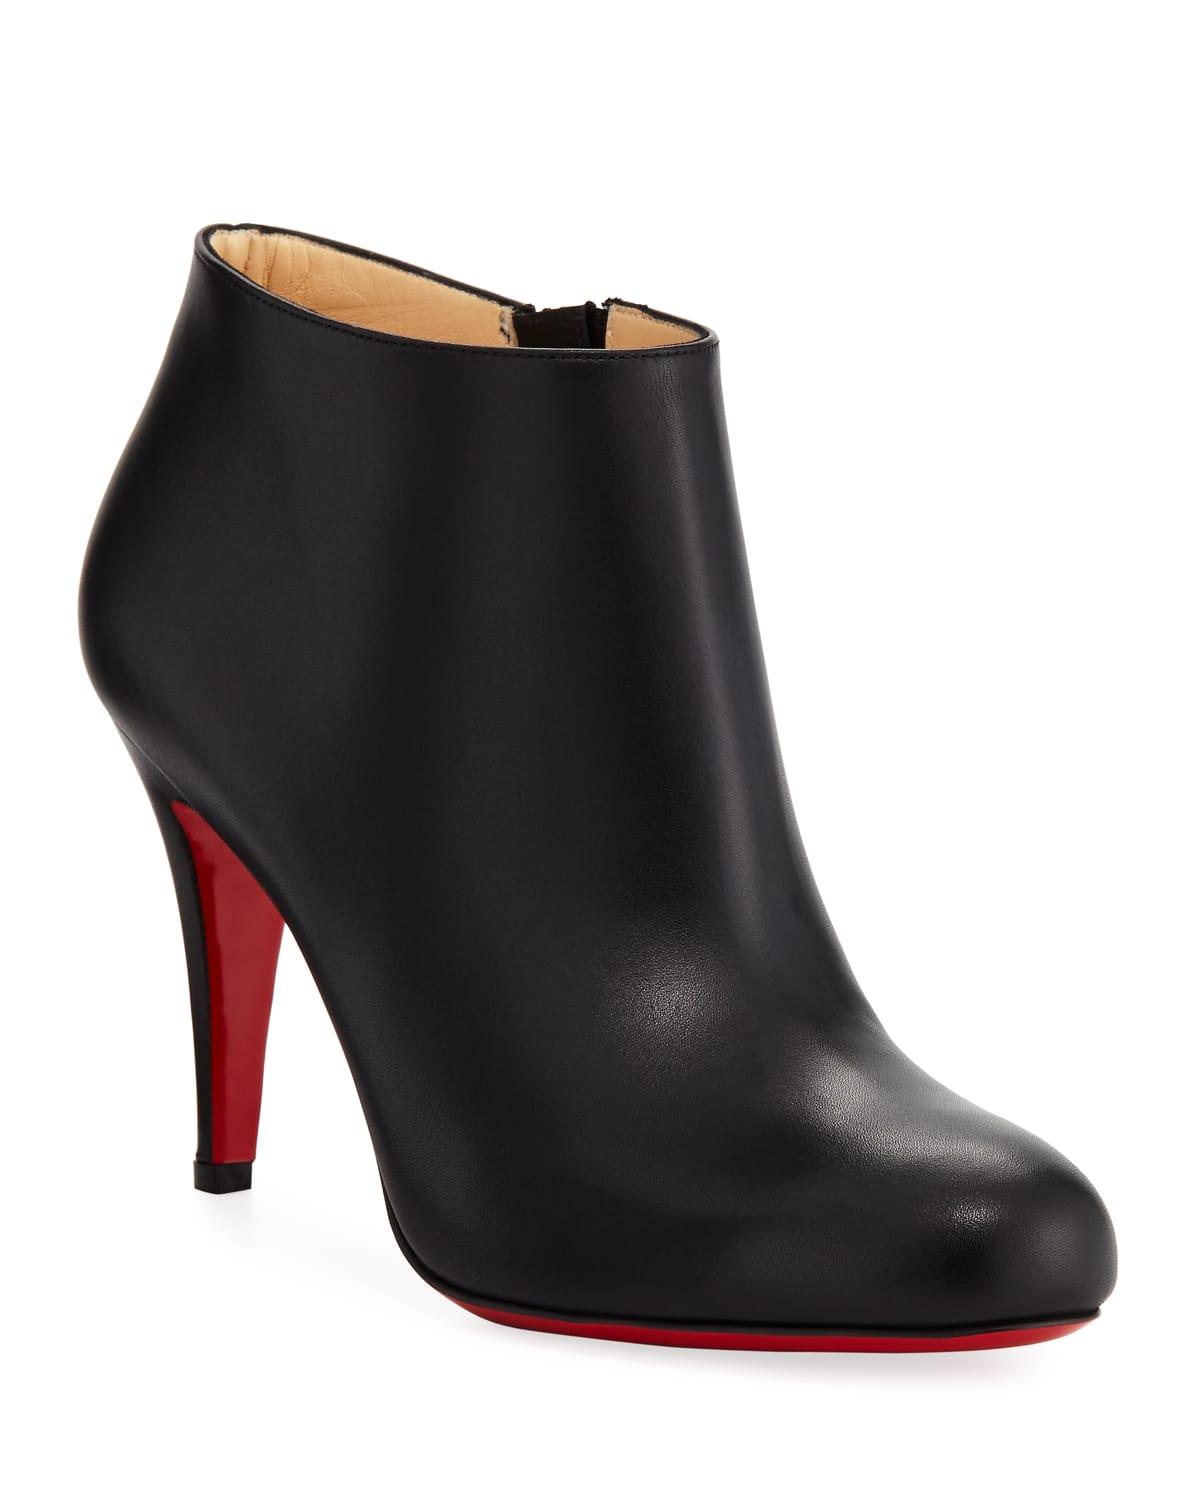 Christian Louboutin Belle Leather Red-sole Ankle Boots in Black | Lyst